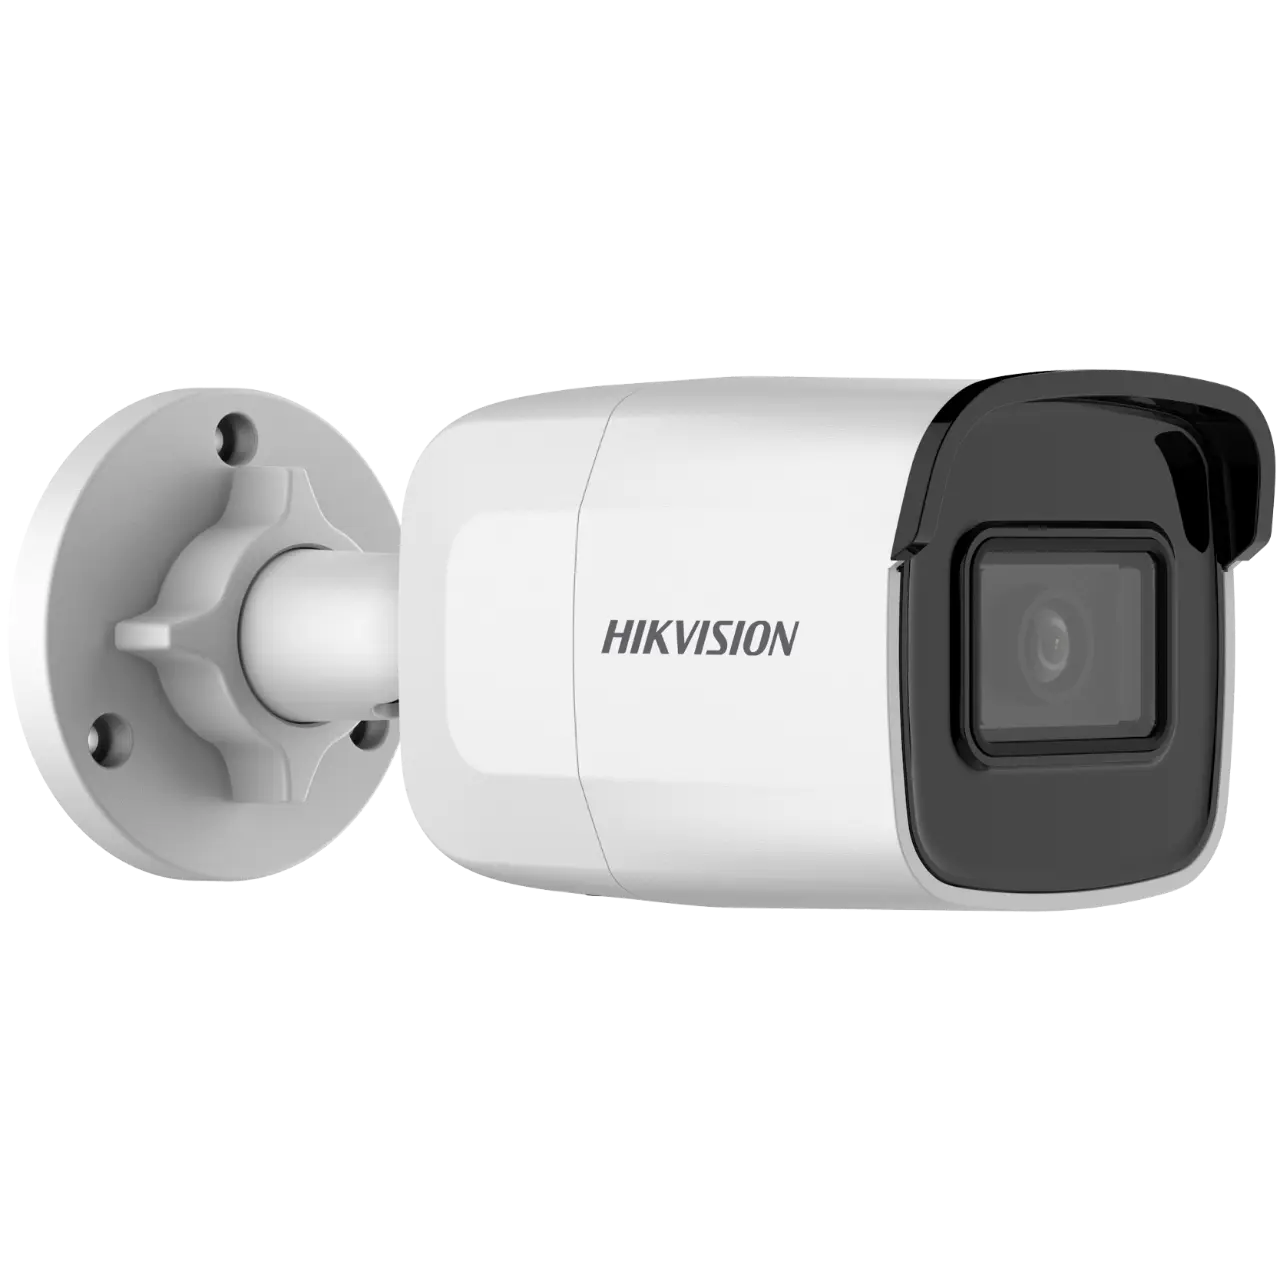 Hikvision   2 MP WDR Fixed Mini Bullet Network Camera   -     DS-2CD2021G1-I(2.8mm)